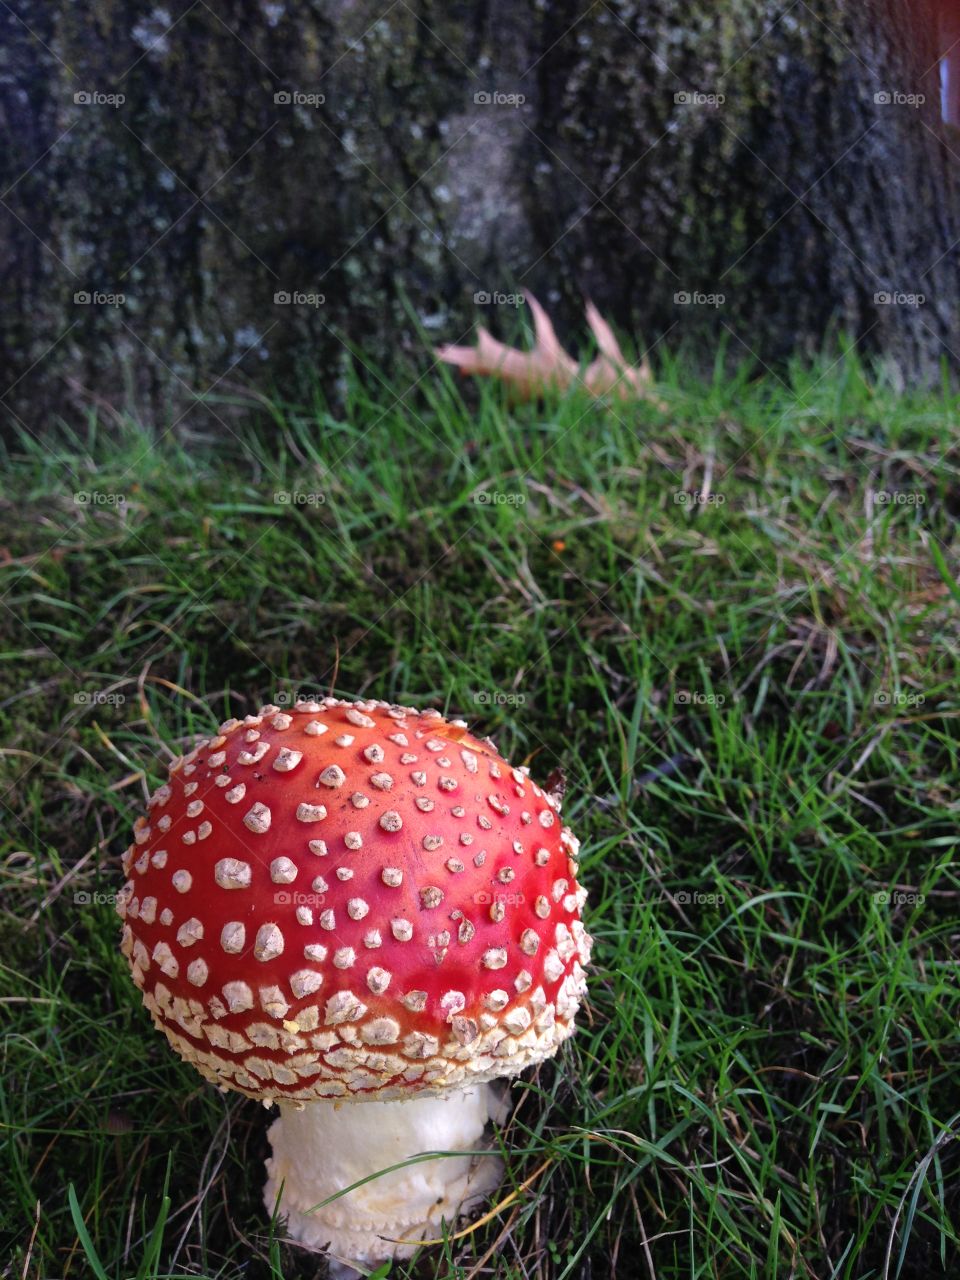 Found this mushroom next to the grocery store.  It looks like something out of a storybook. 